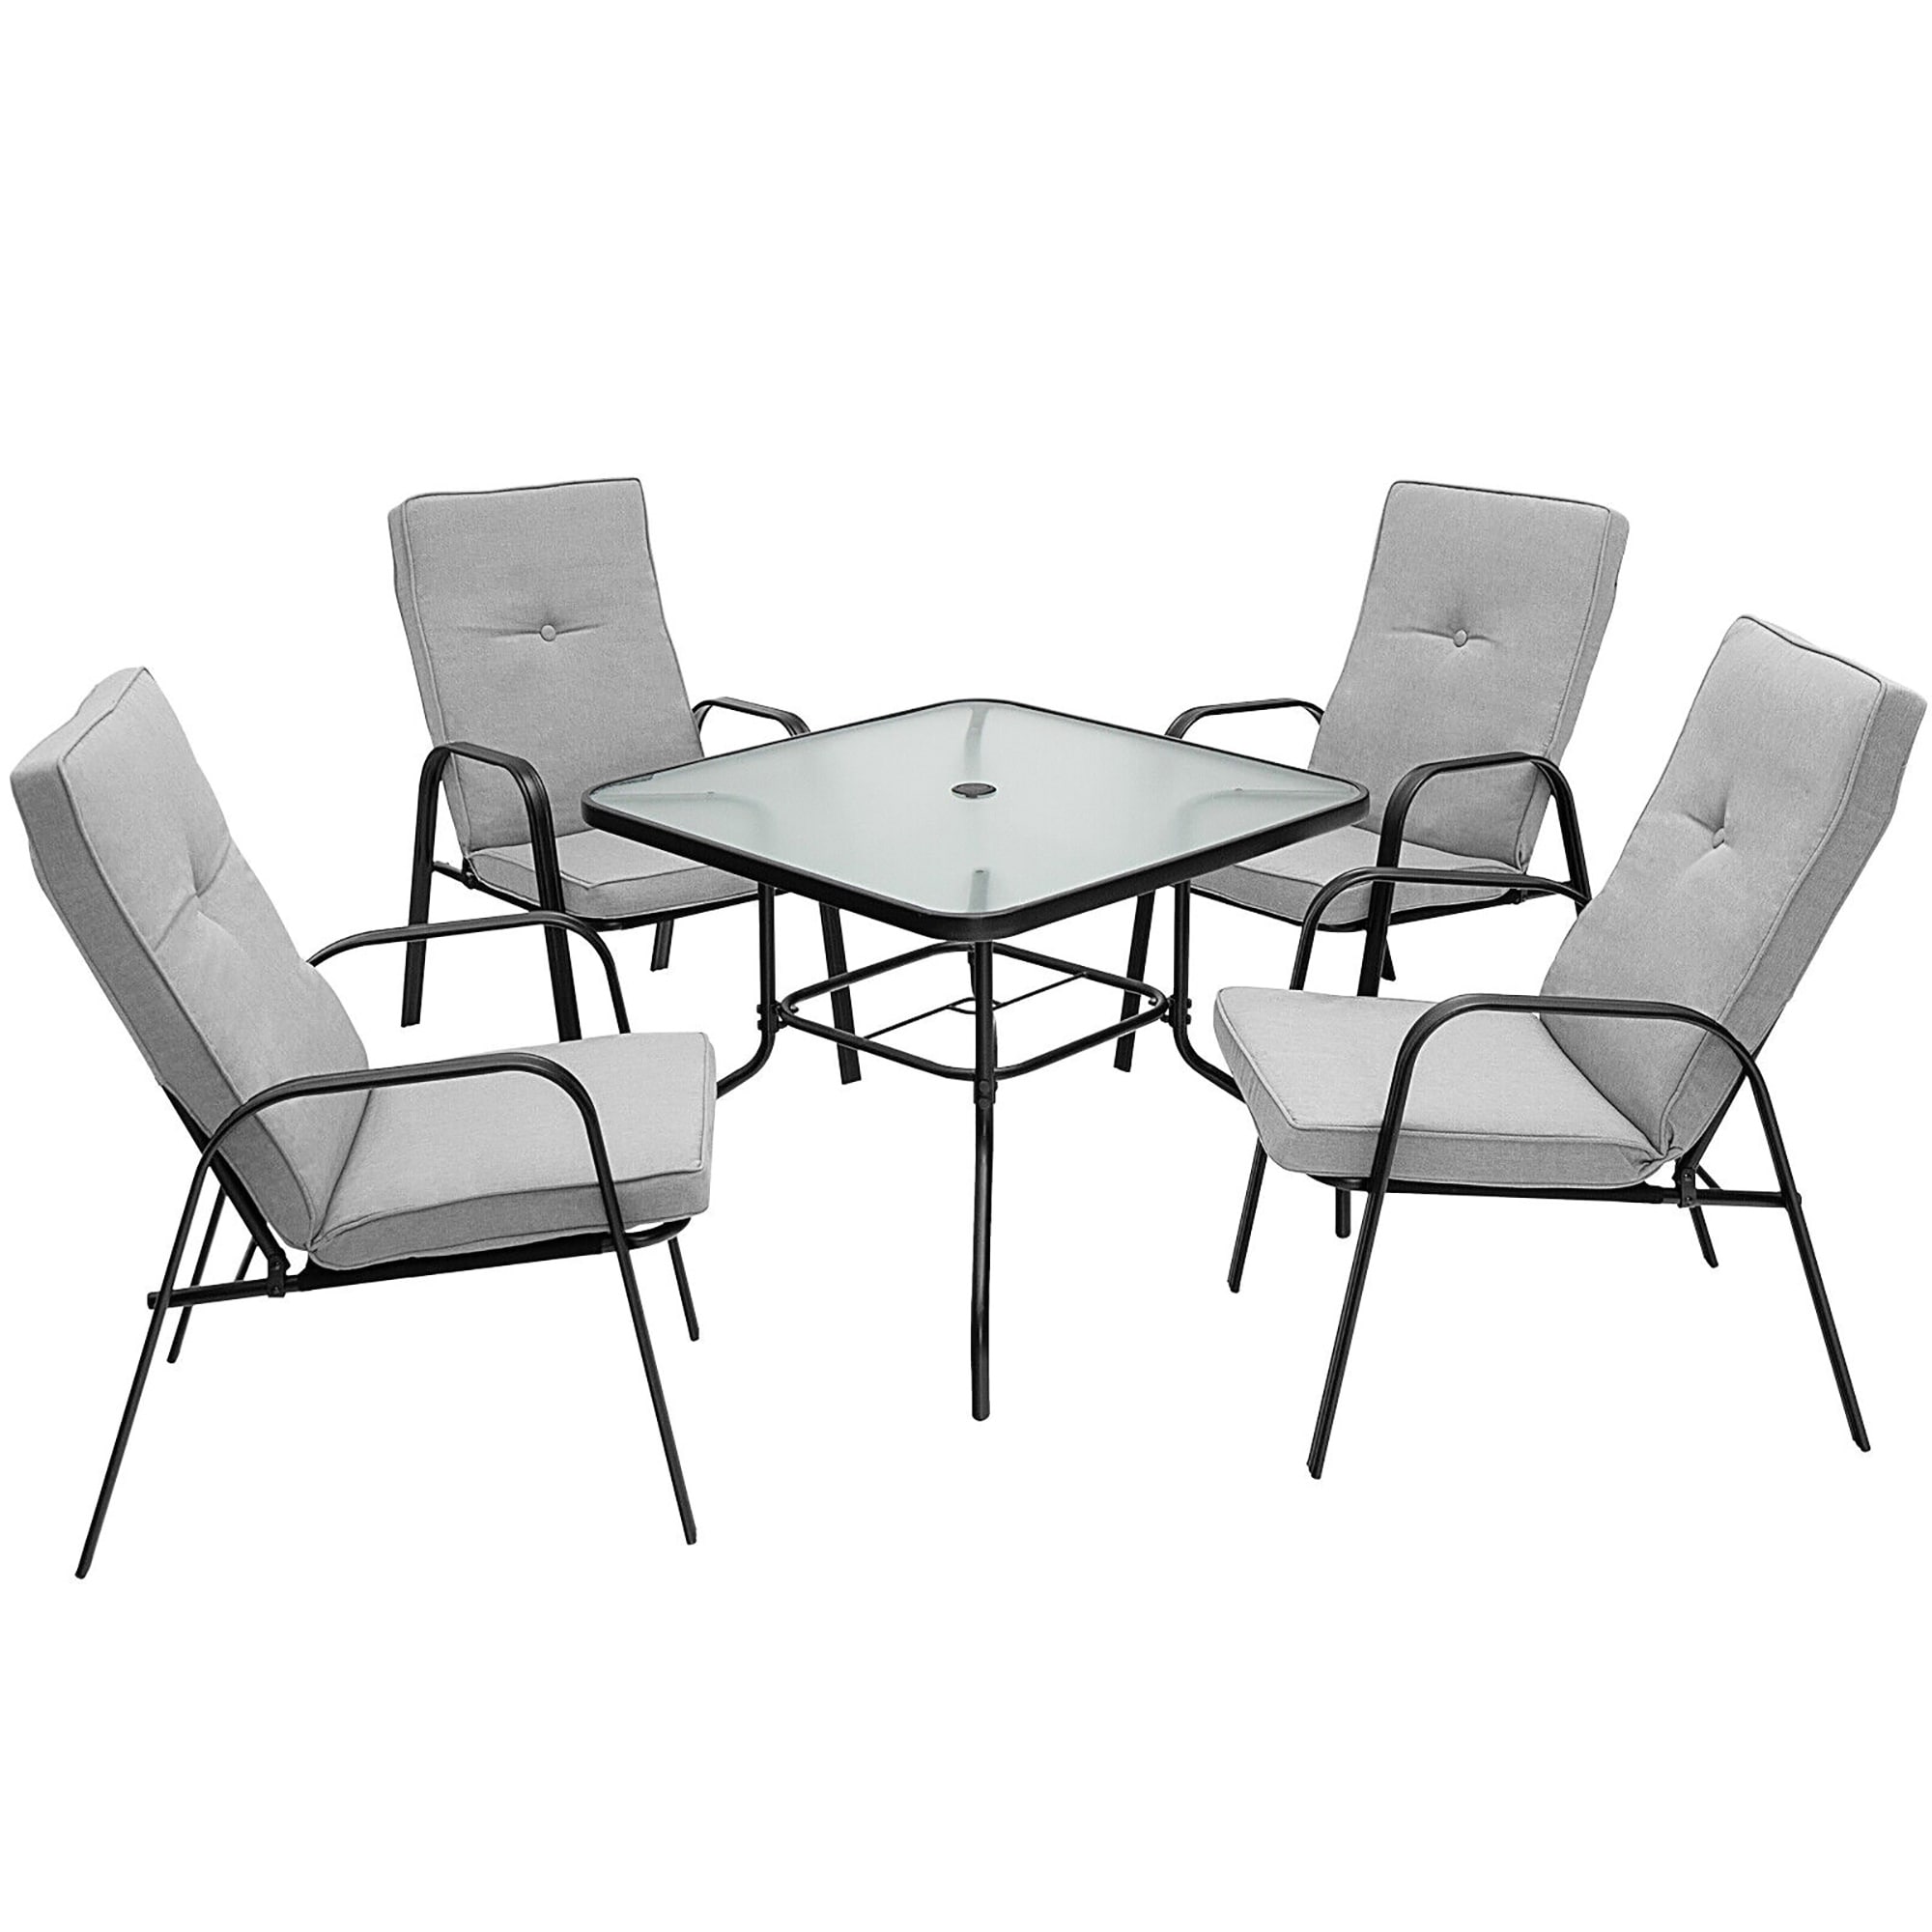 Gymax 35'' Patio Dining Square Tempered Glass Table w/ Umbrella Hole